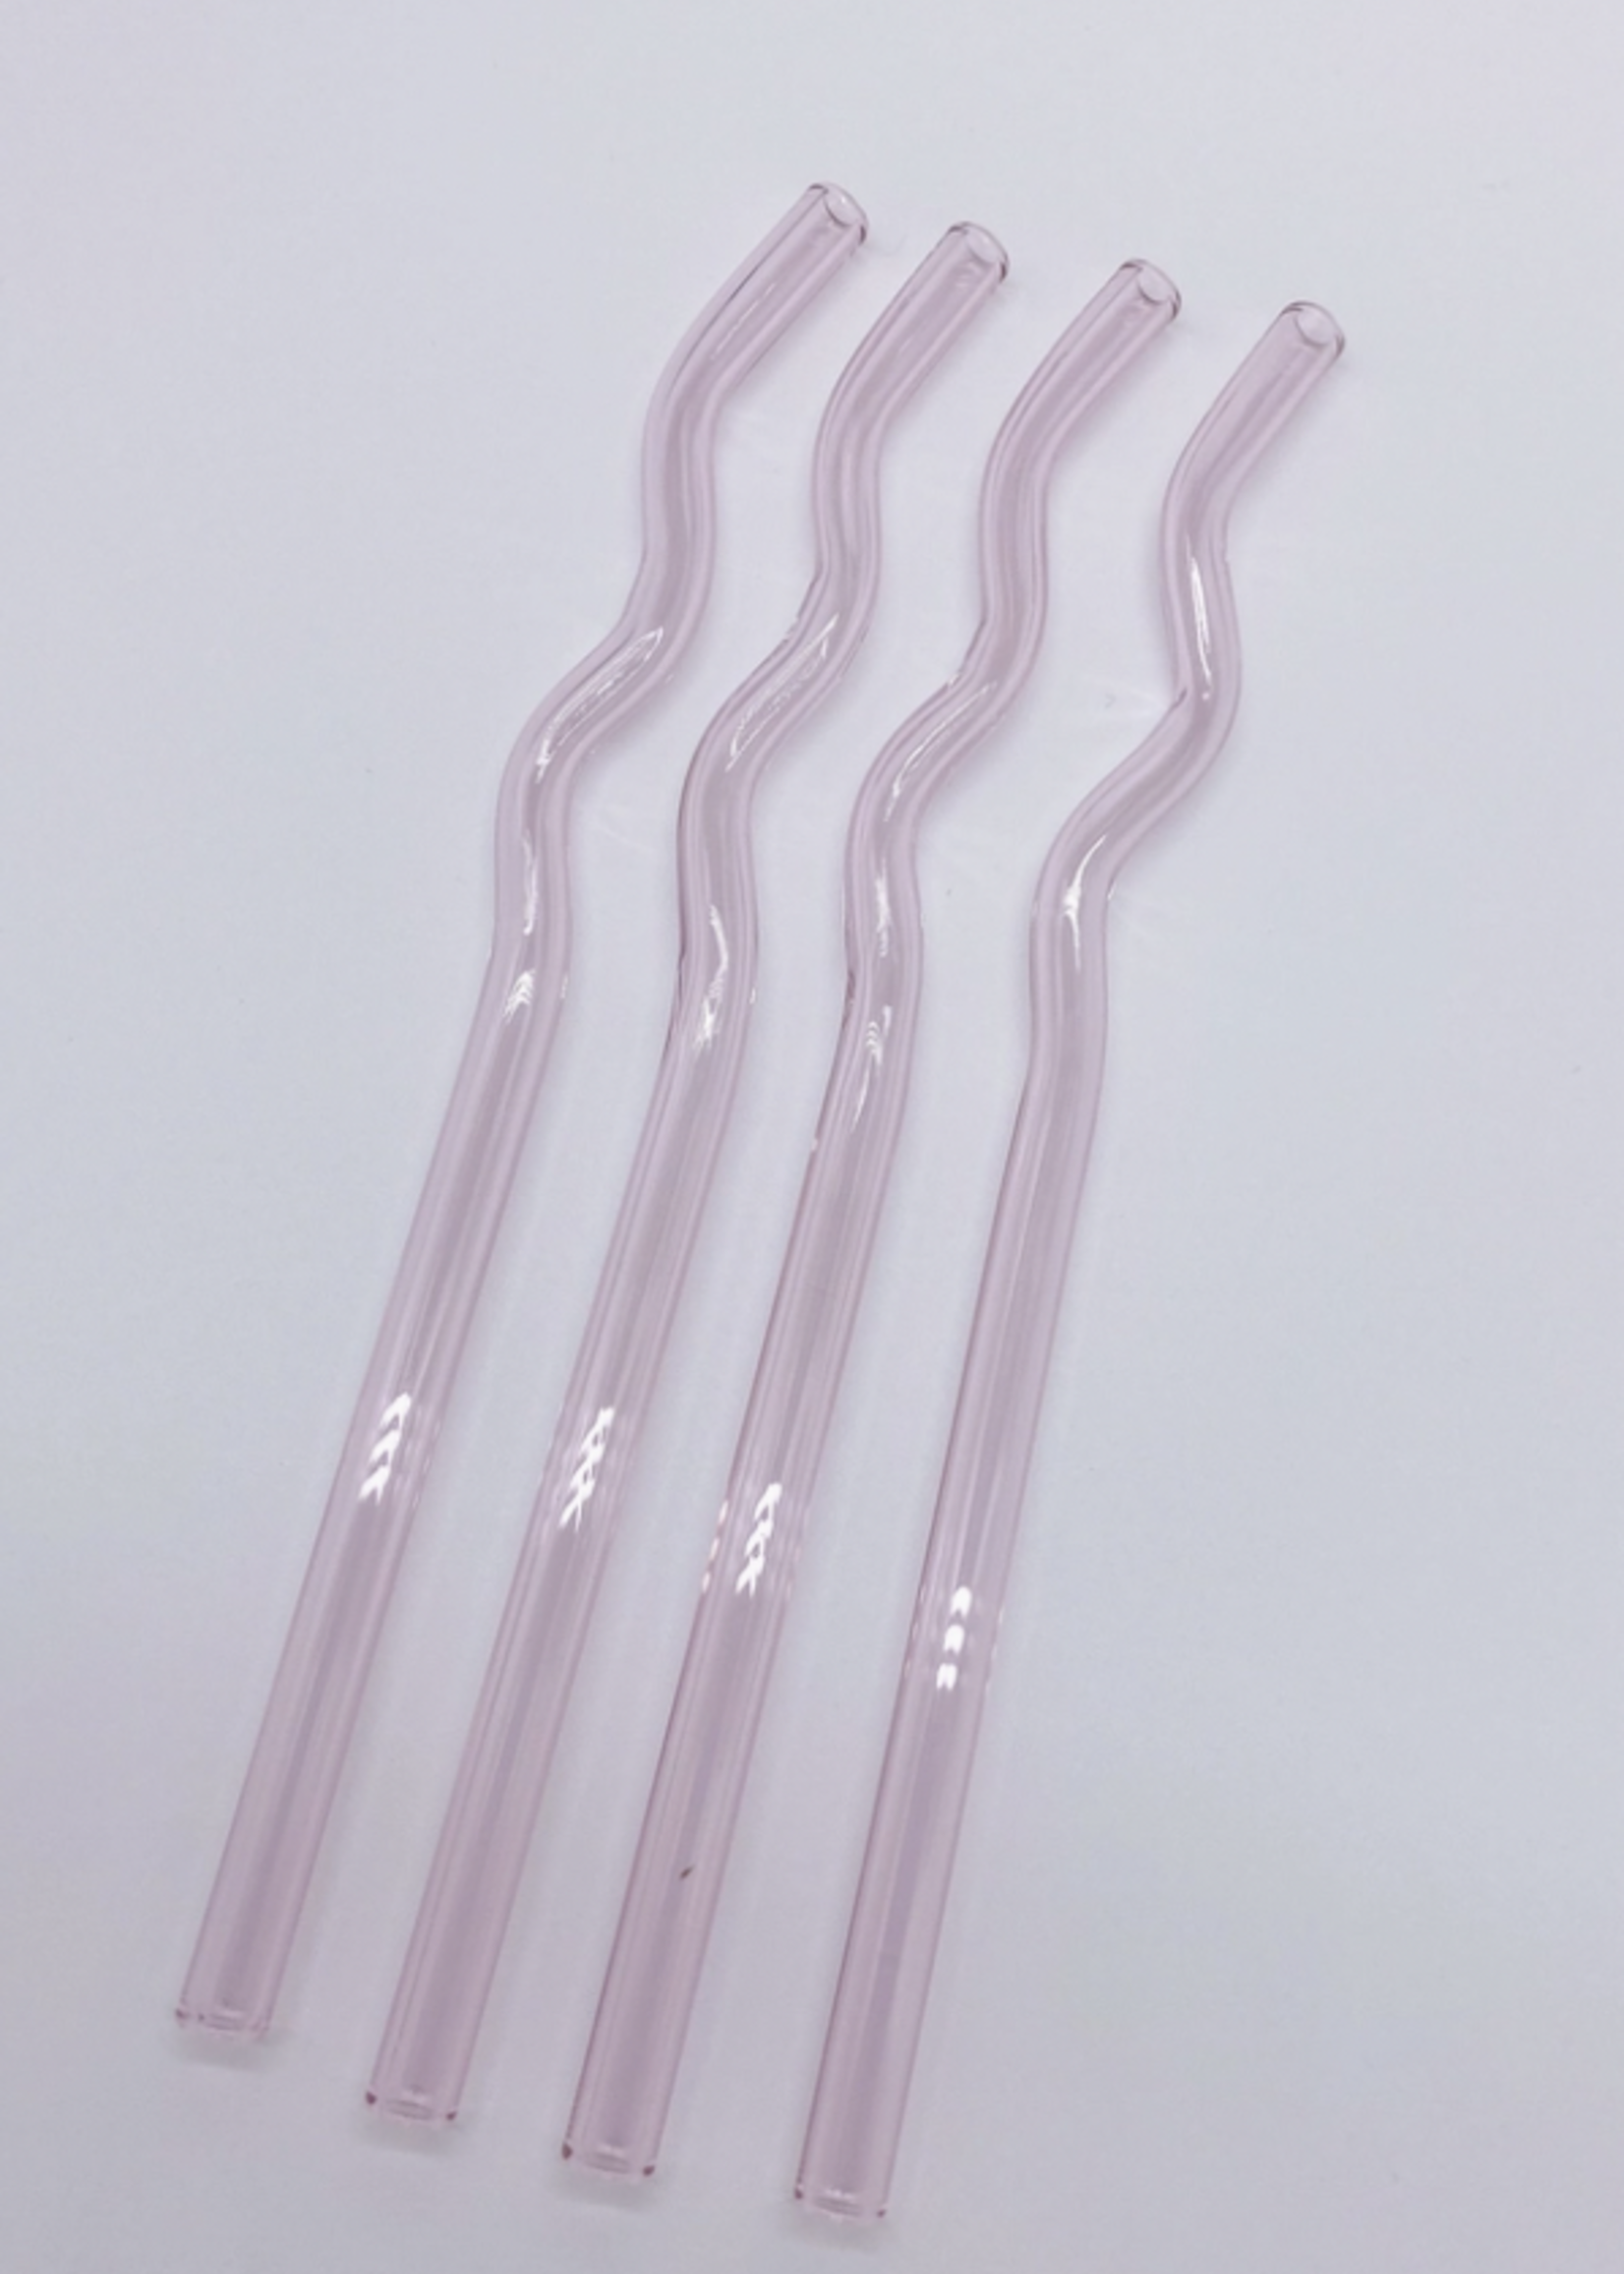 Emily Paige Co Glass Straw | Multiple Styles